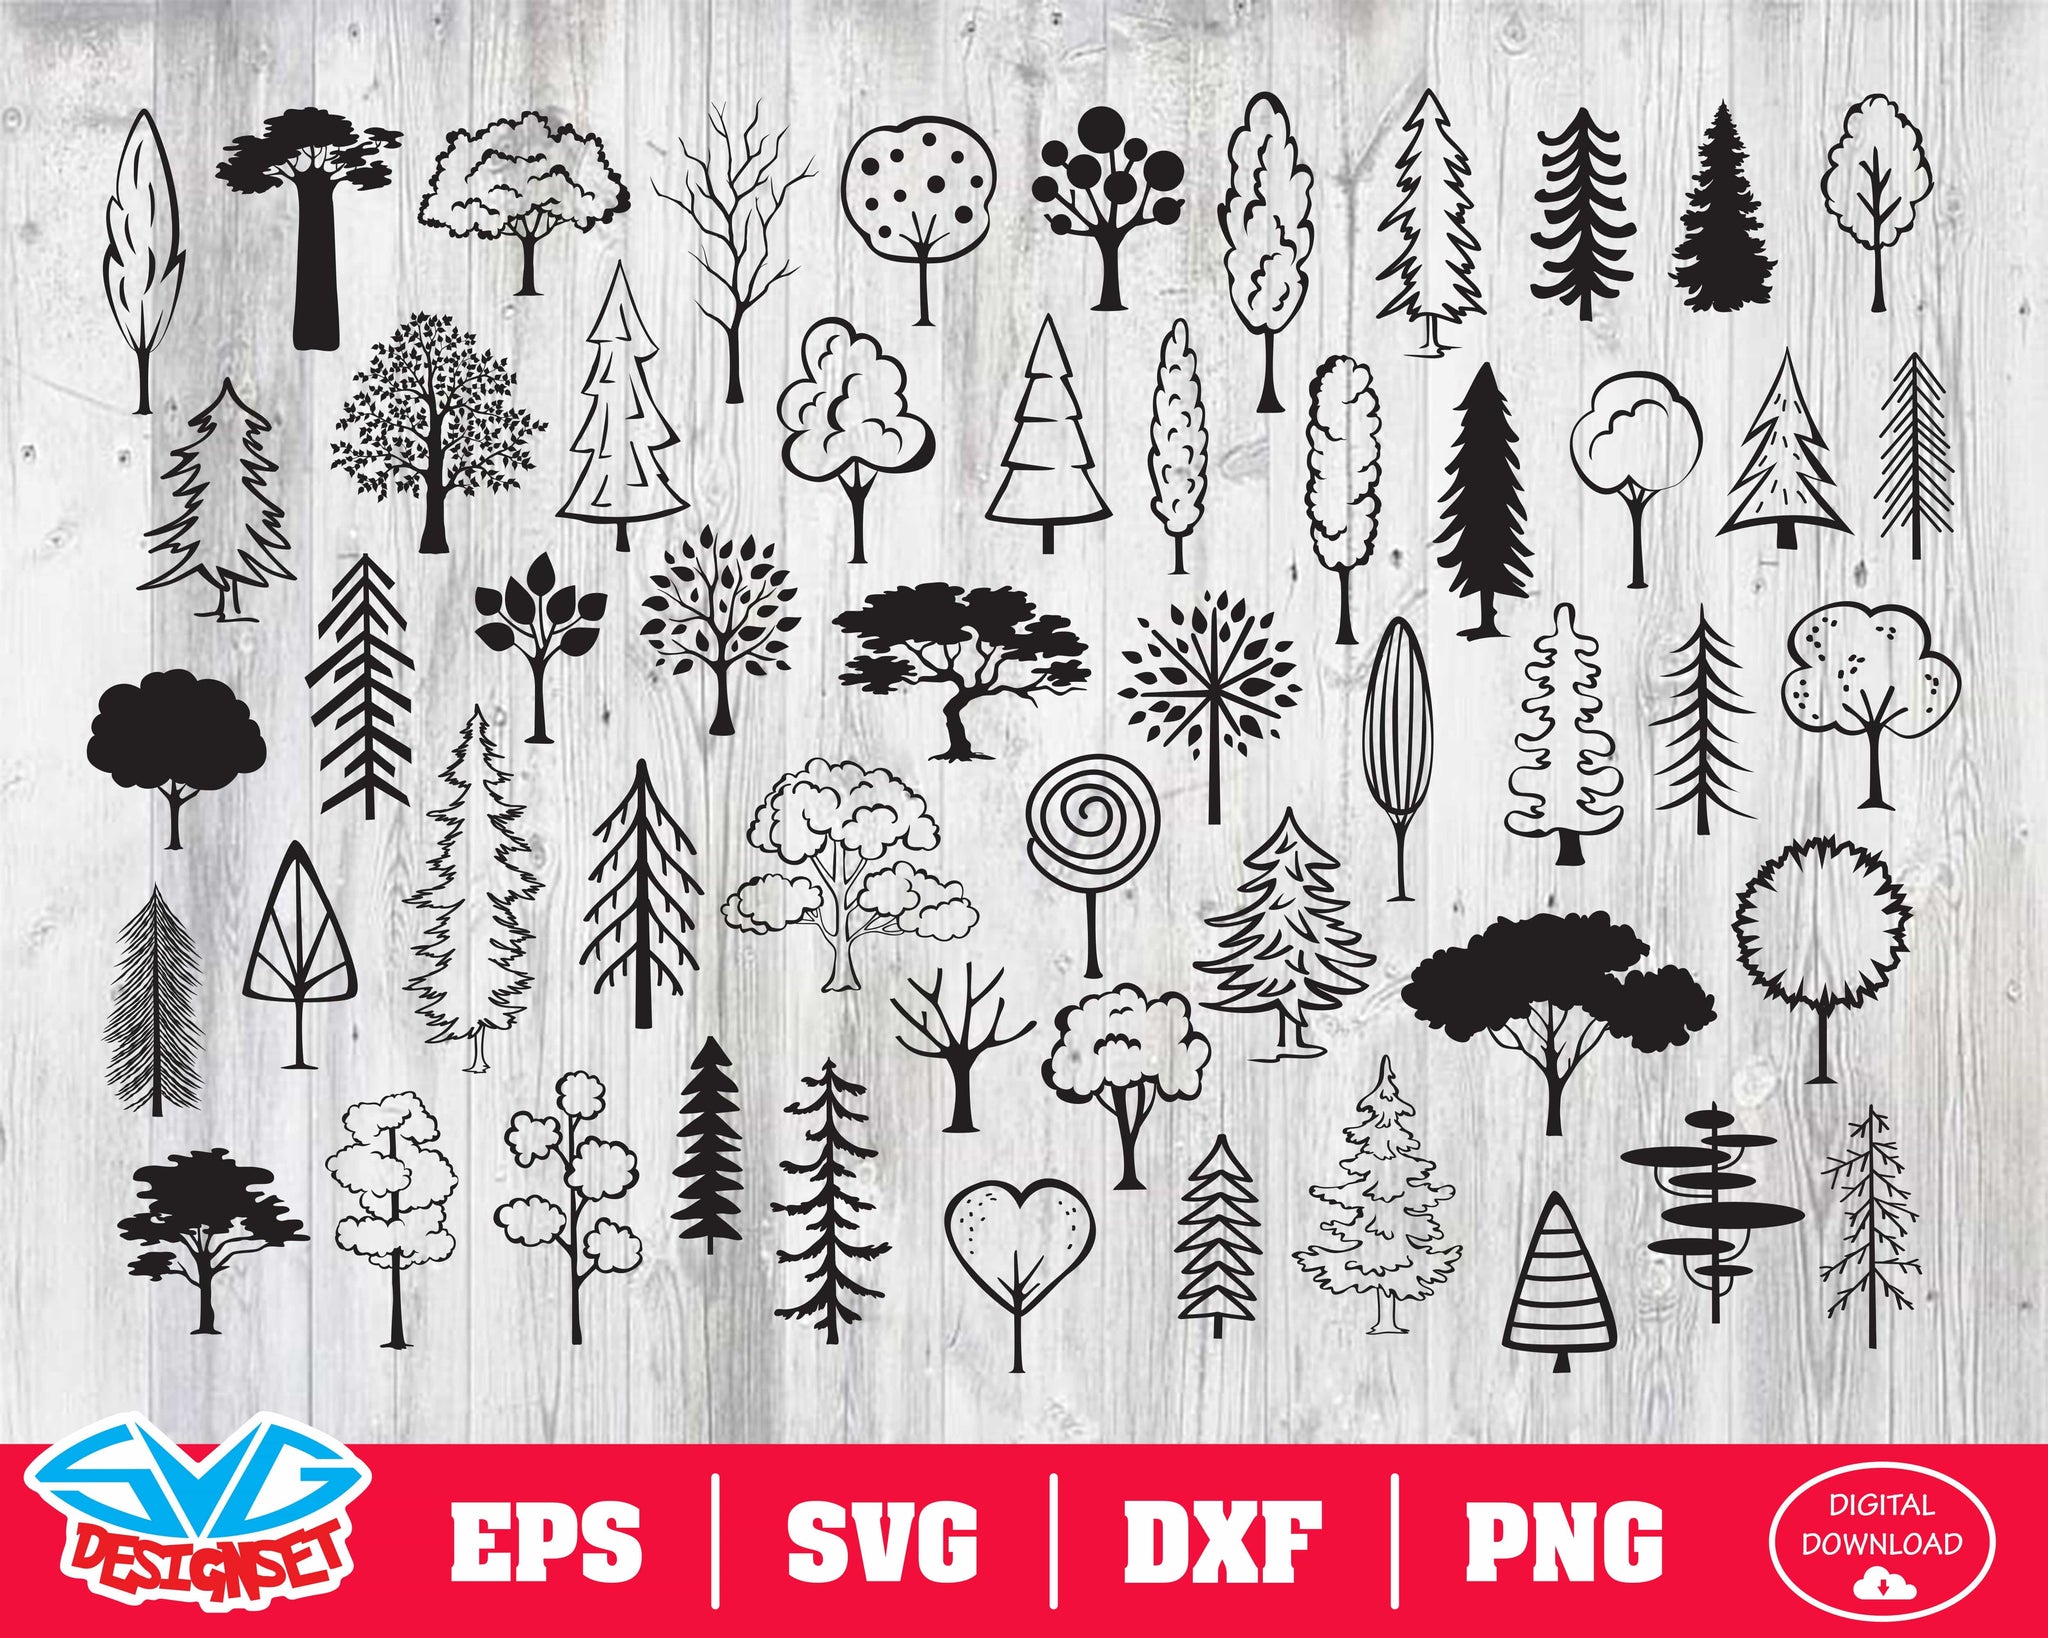 Tree Svg, Dxf, Eps, Png, Clipart, Silhouette and Cutfiles - SVGDesignSets